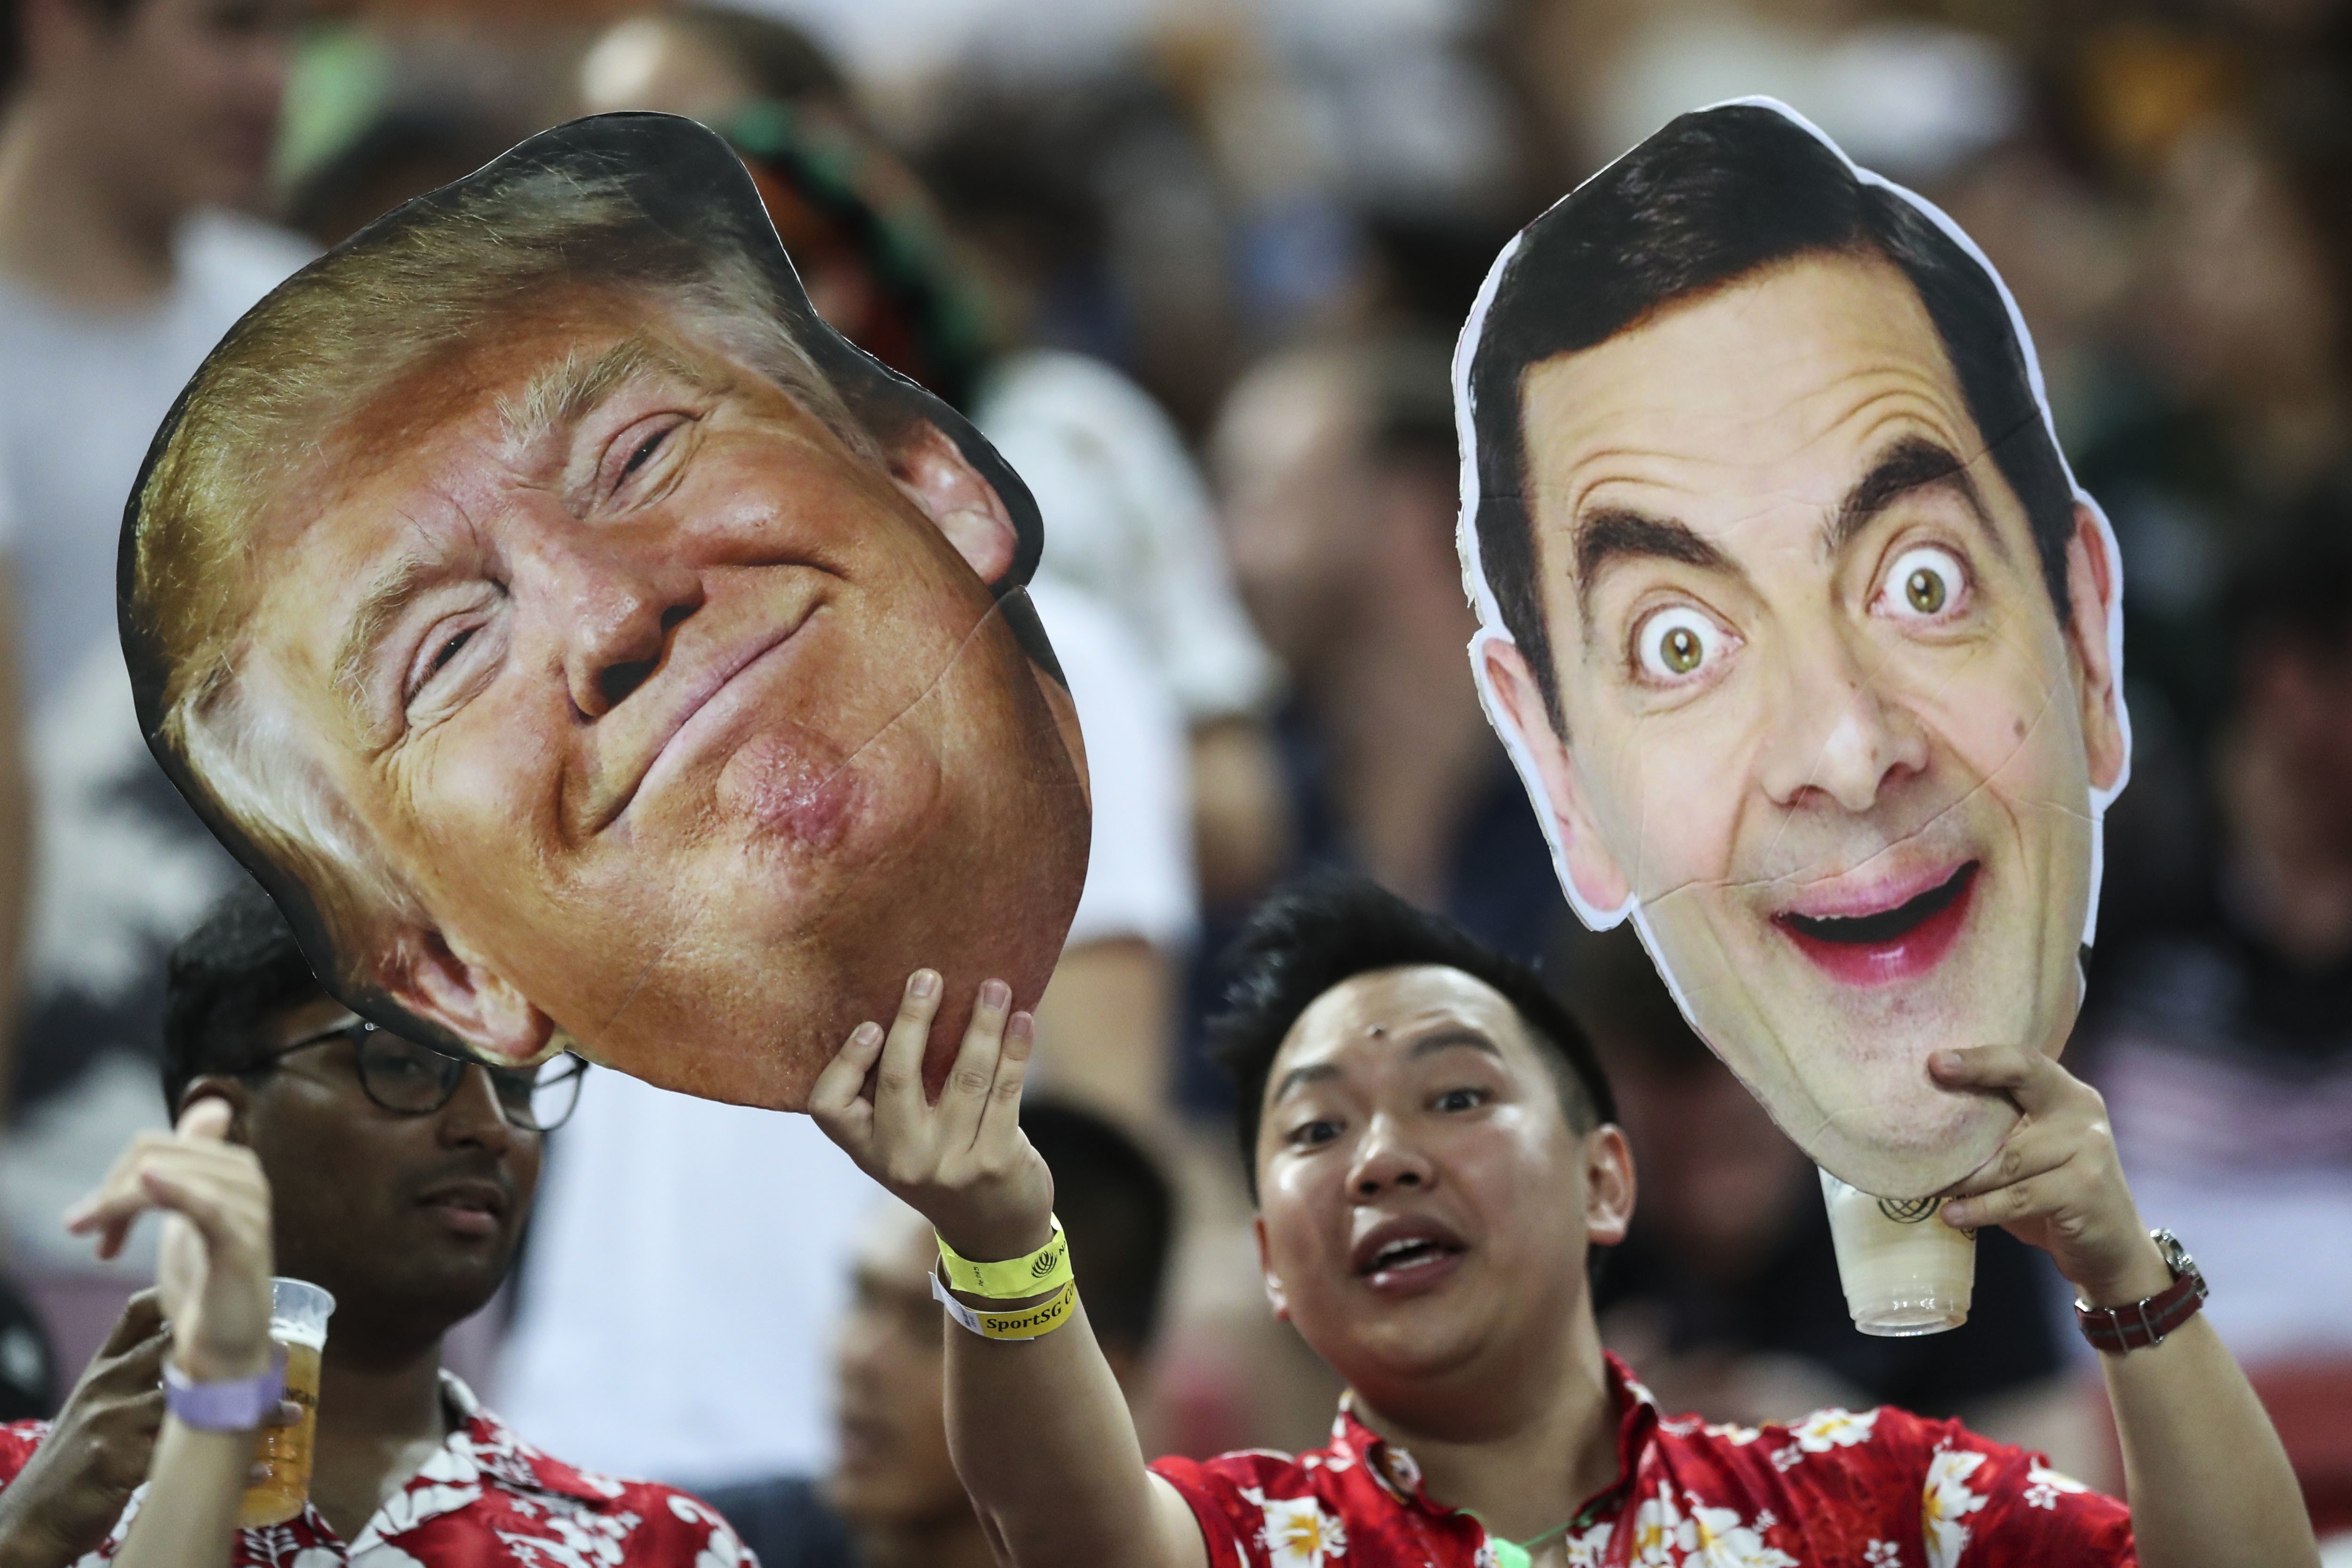 A fan holds up cutouts of US President Donald Trump and Mr Bean, played by British actor Rowan Atkinson, during the HSBC World Rugby Sevens Series 2018 finals on April 29 in Singapore. Trump’s “madman” diplomacy might just secure him enough foreign policy wins to shore up his reputation at home. Photo: AP 